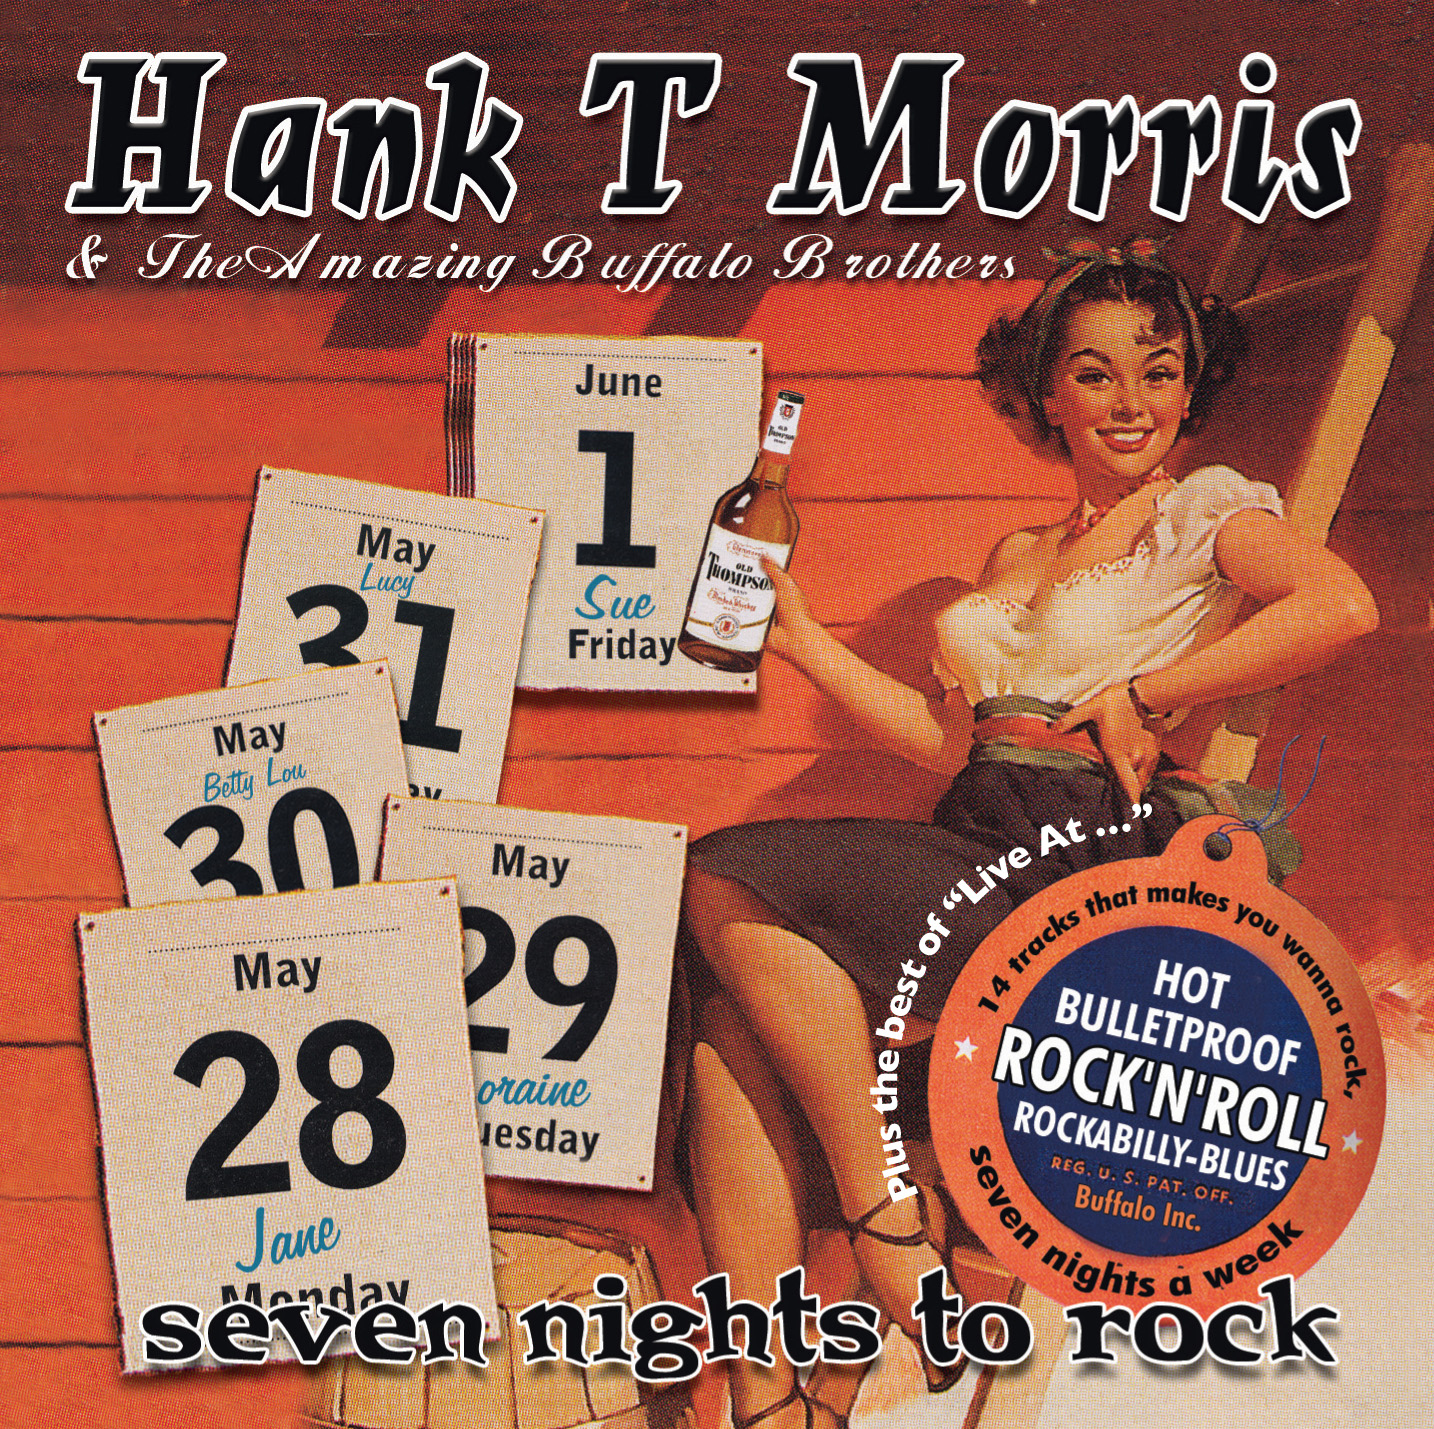 Hank T Morris & The Amazing Buffalo Brothers - Seven Nights To Rock - Plus - CD